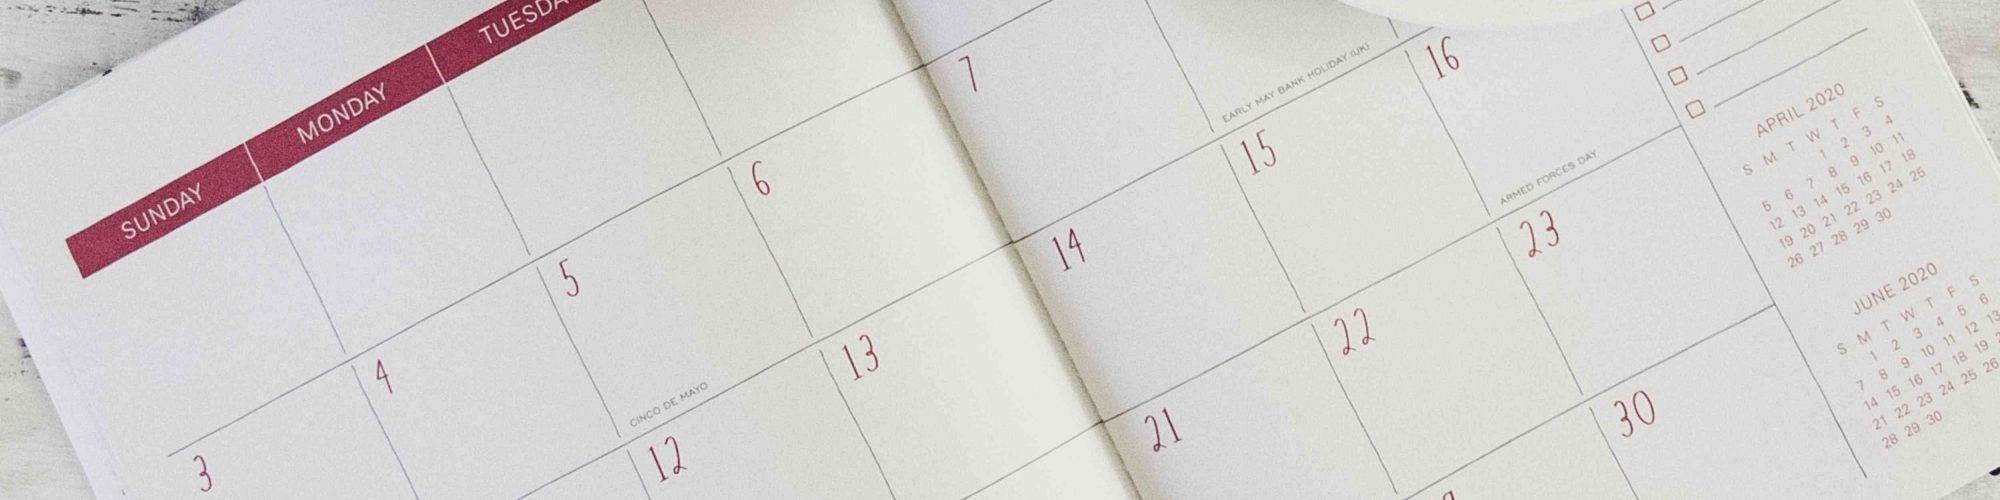 How to make a calendar in Google Sheets